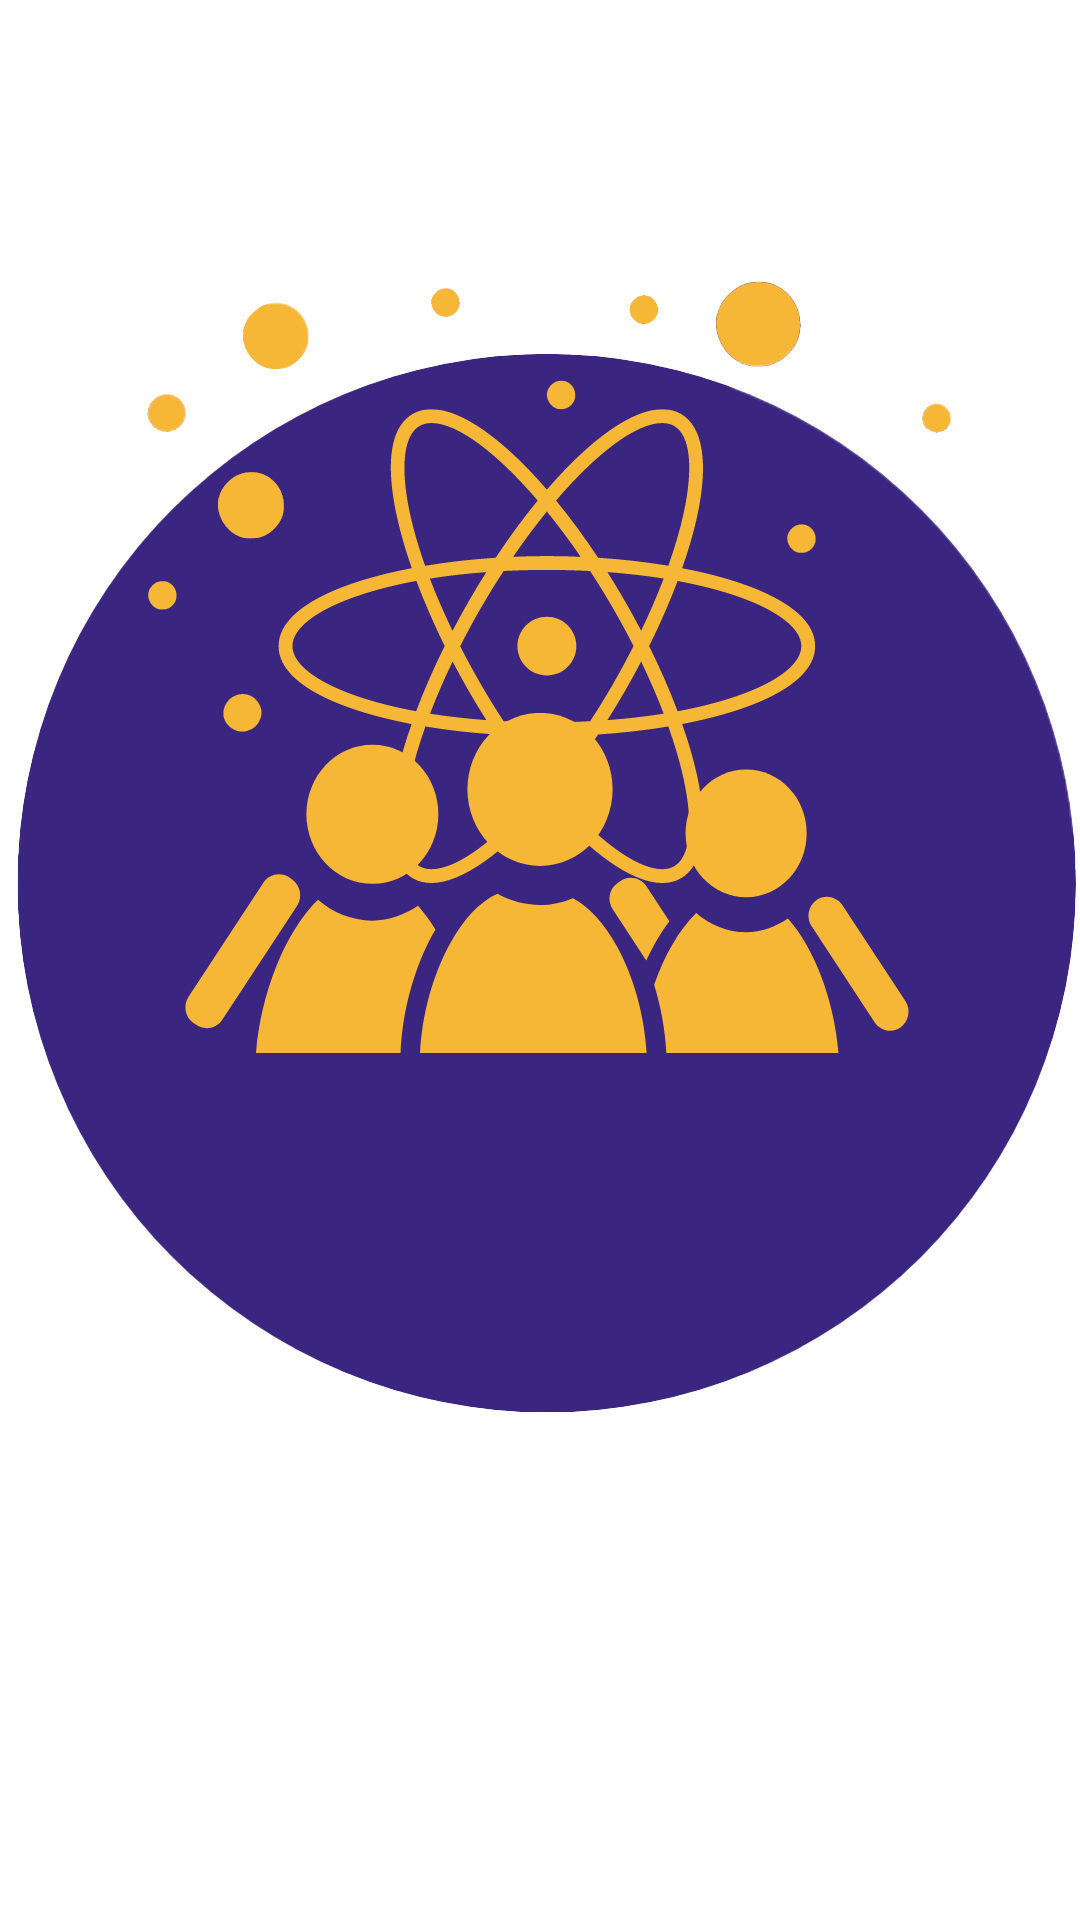 Illustration of orange people icon with an orange atom symbol on a purple background representing collaboration and scientific knowledge..